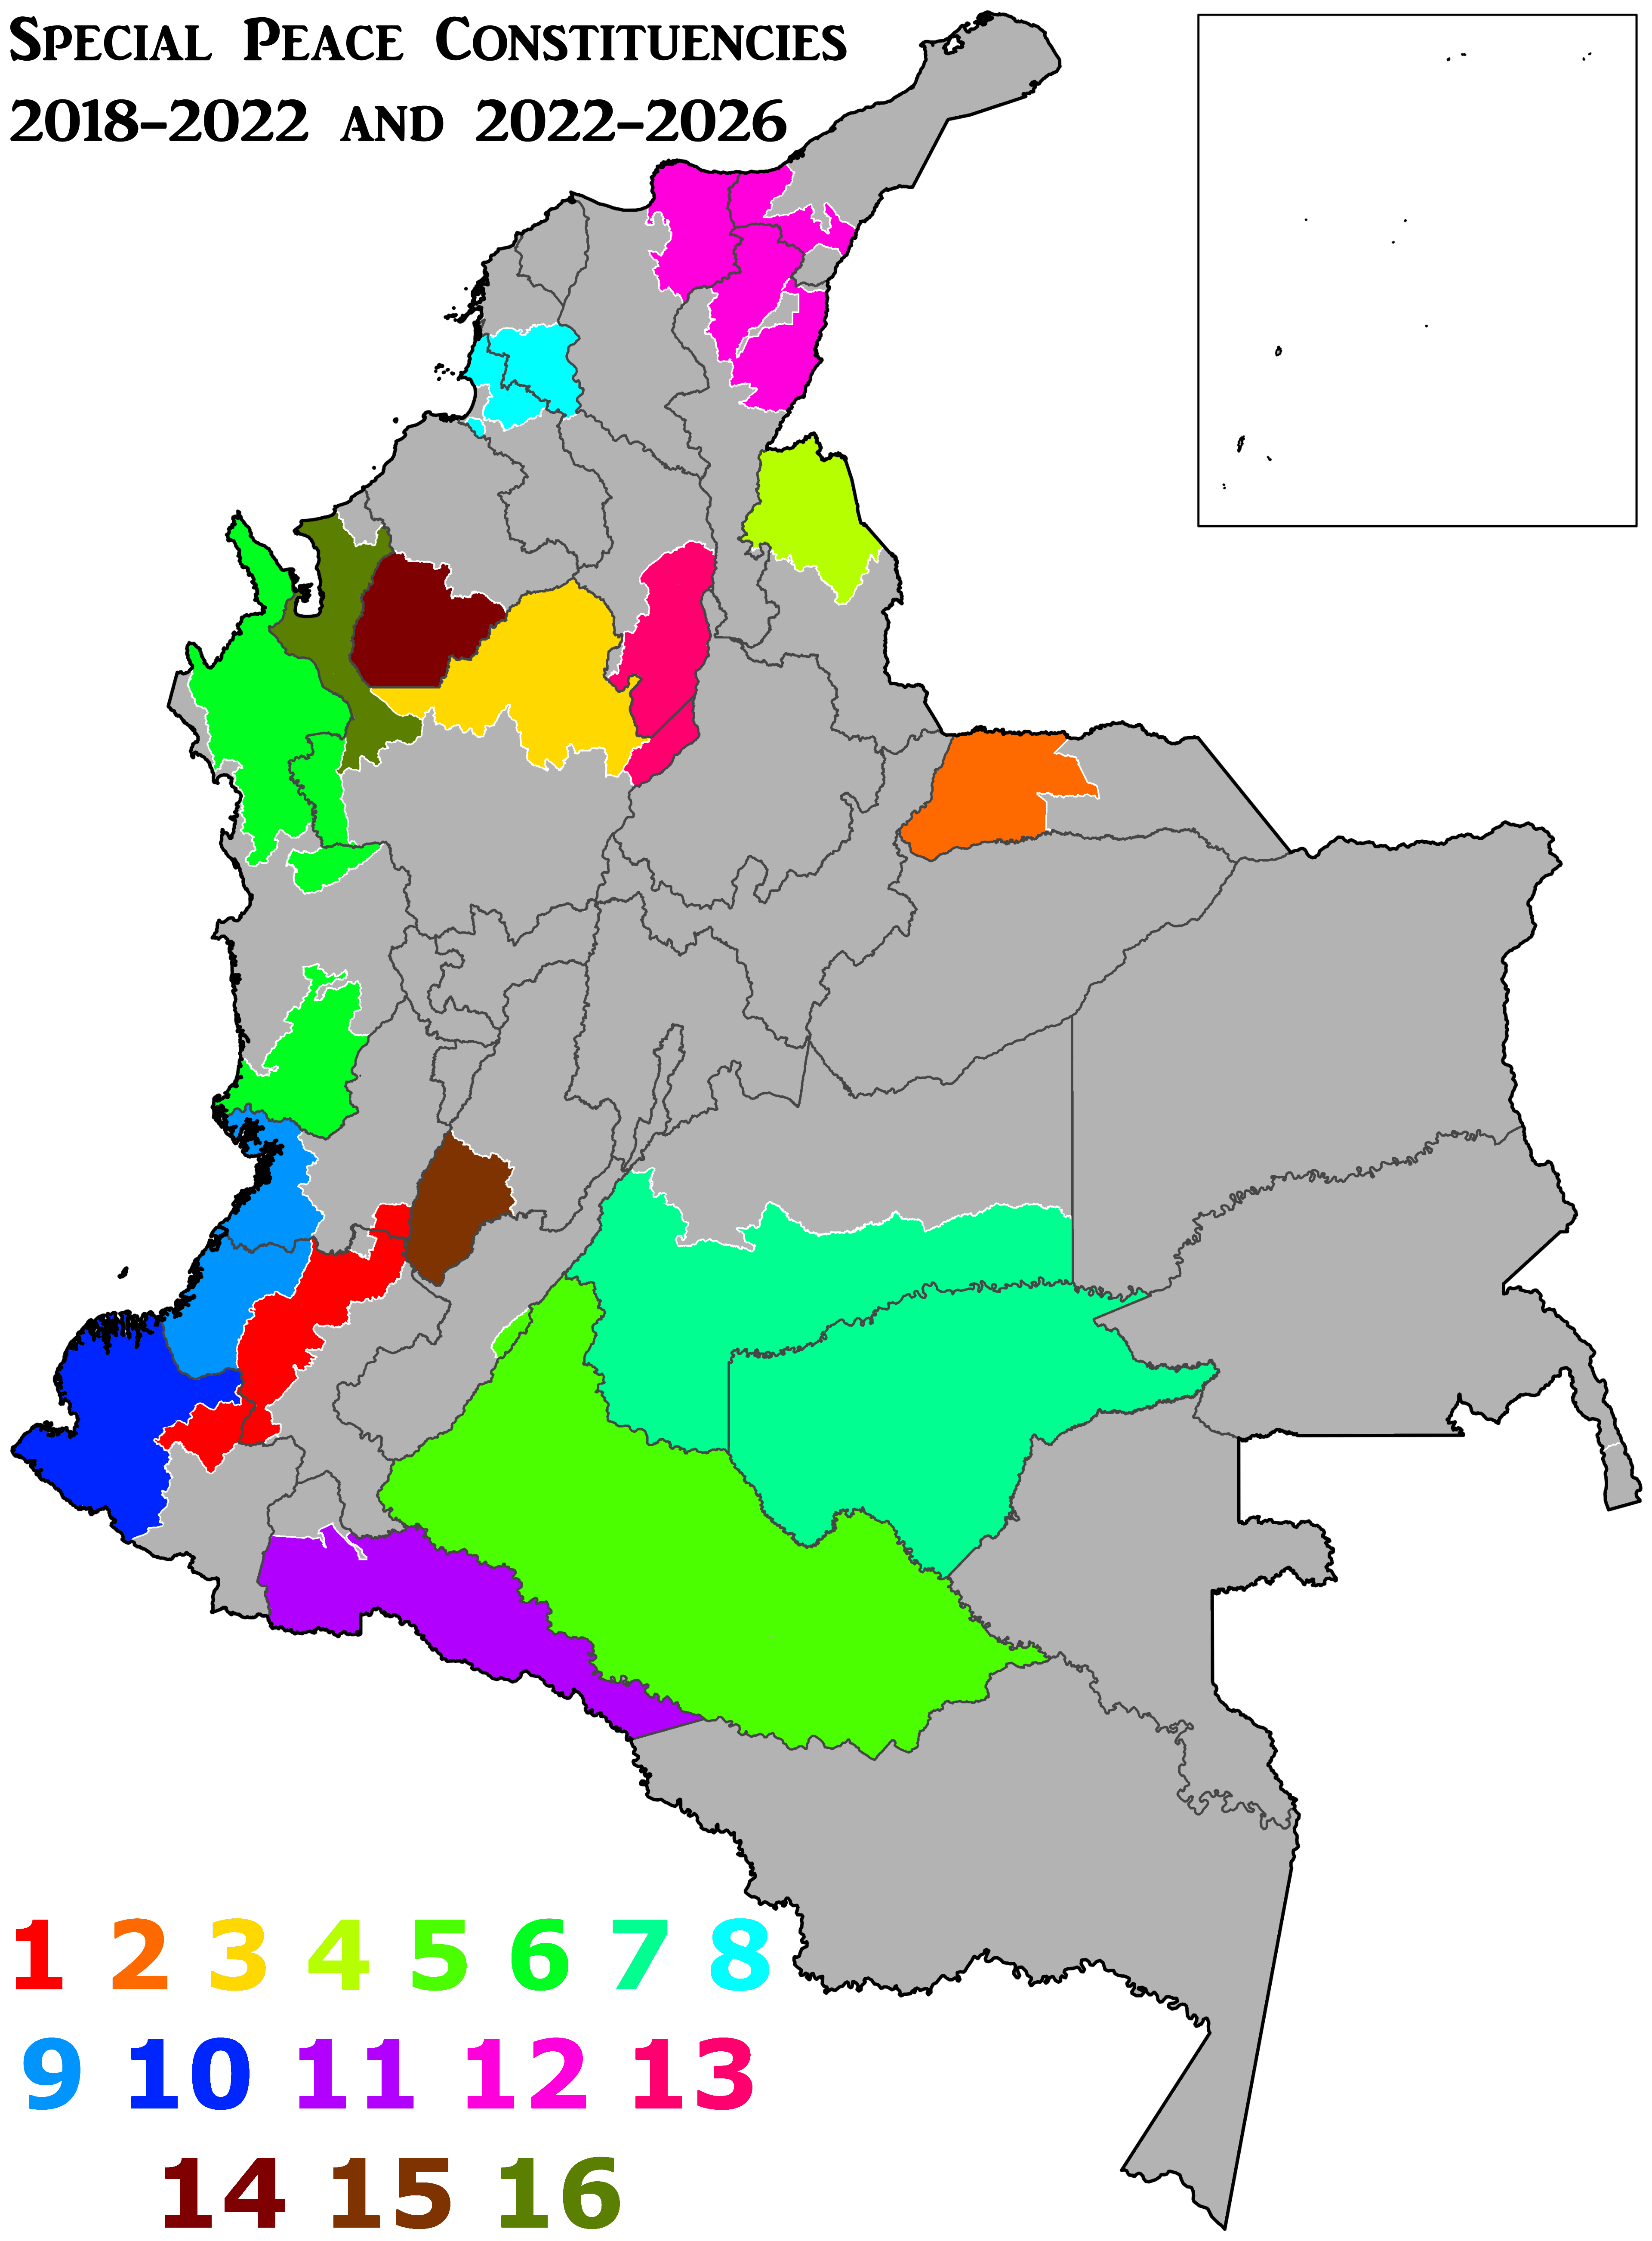 colombian_special_peace_constituencies_by_fed42-db85erp.png